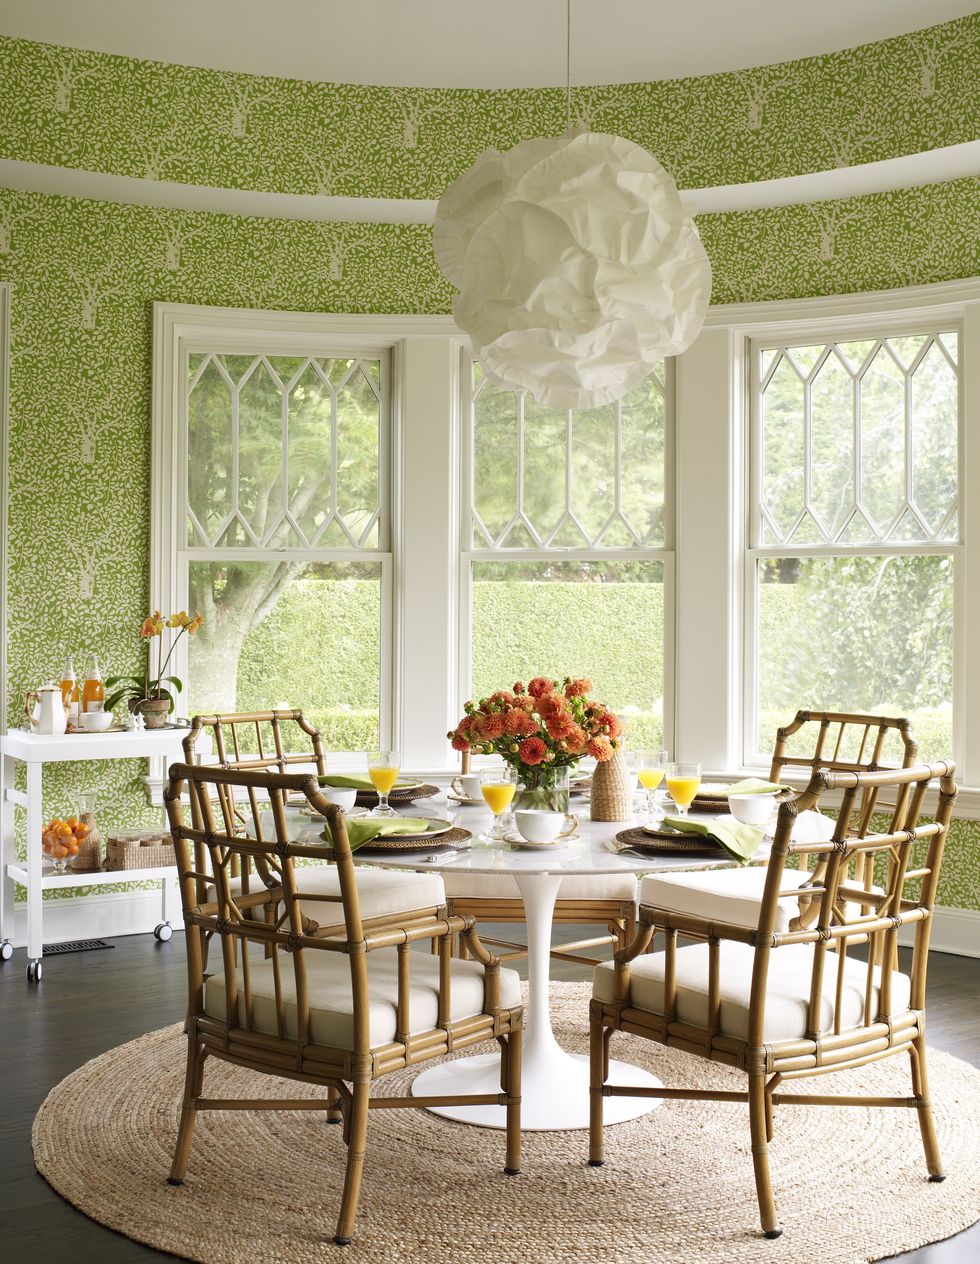 Dining room, Furniture, Room, Green, Yellow, Table, Interior design, Chair, Home, Kitchen & dining room table, 